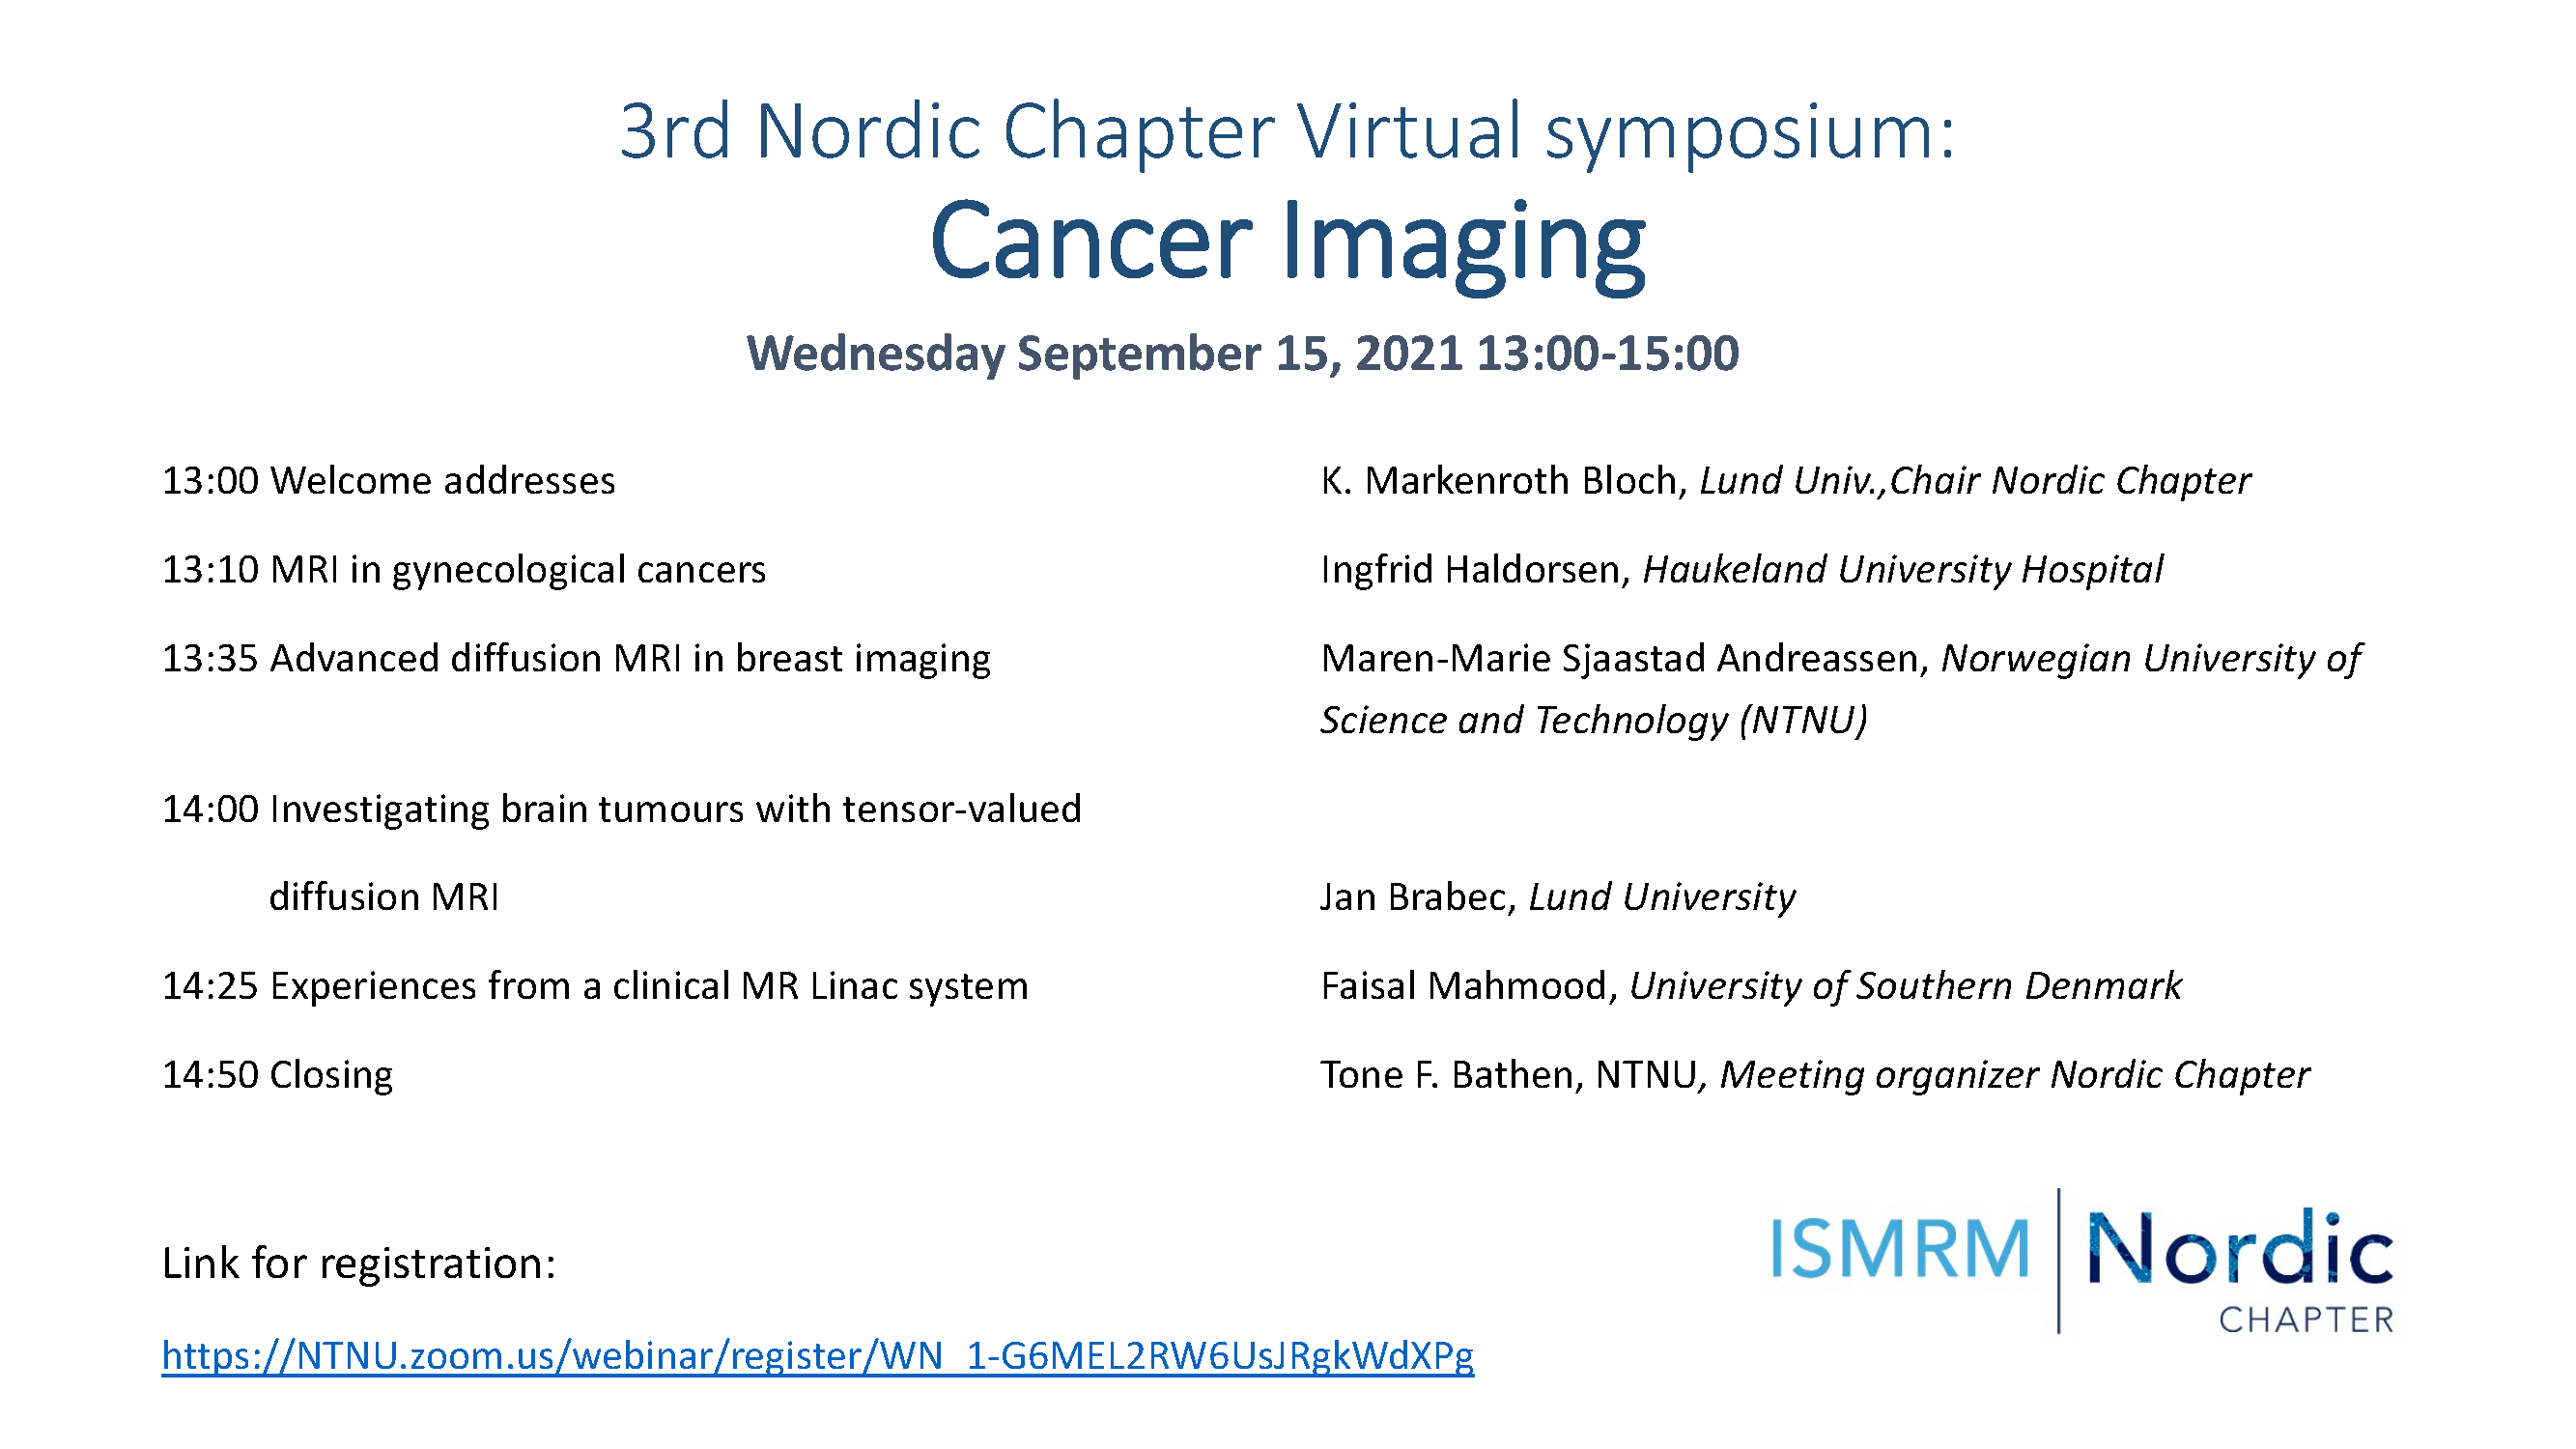 3rd ISMRM Nordic Chapter Virtual symposium final